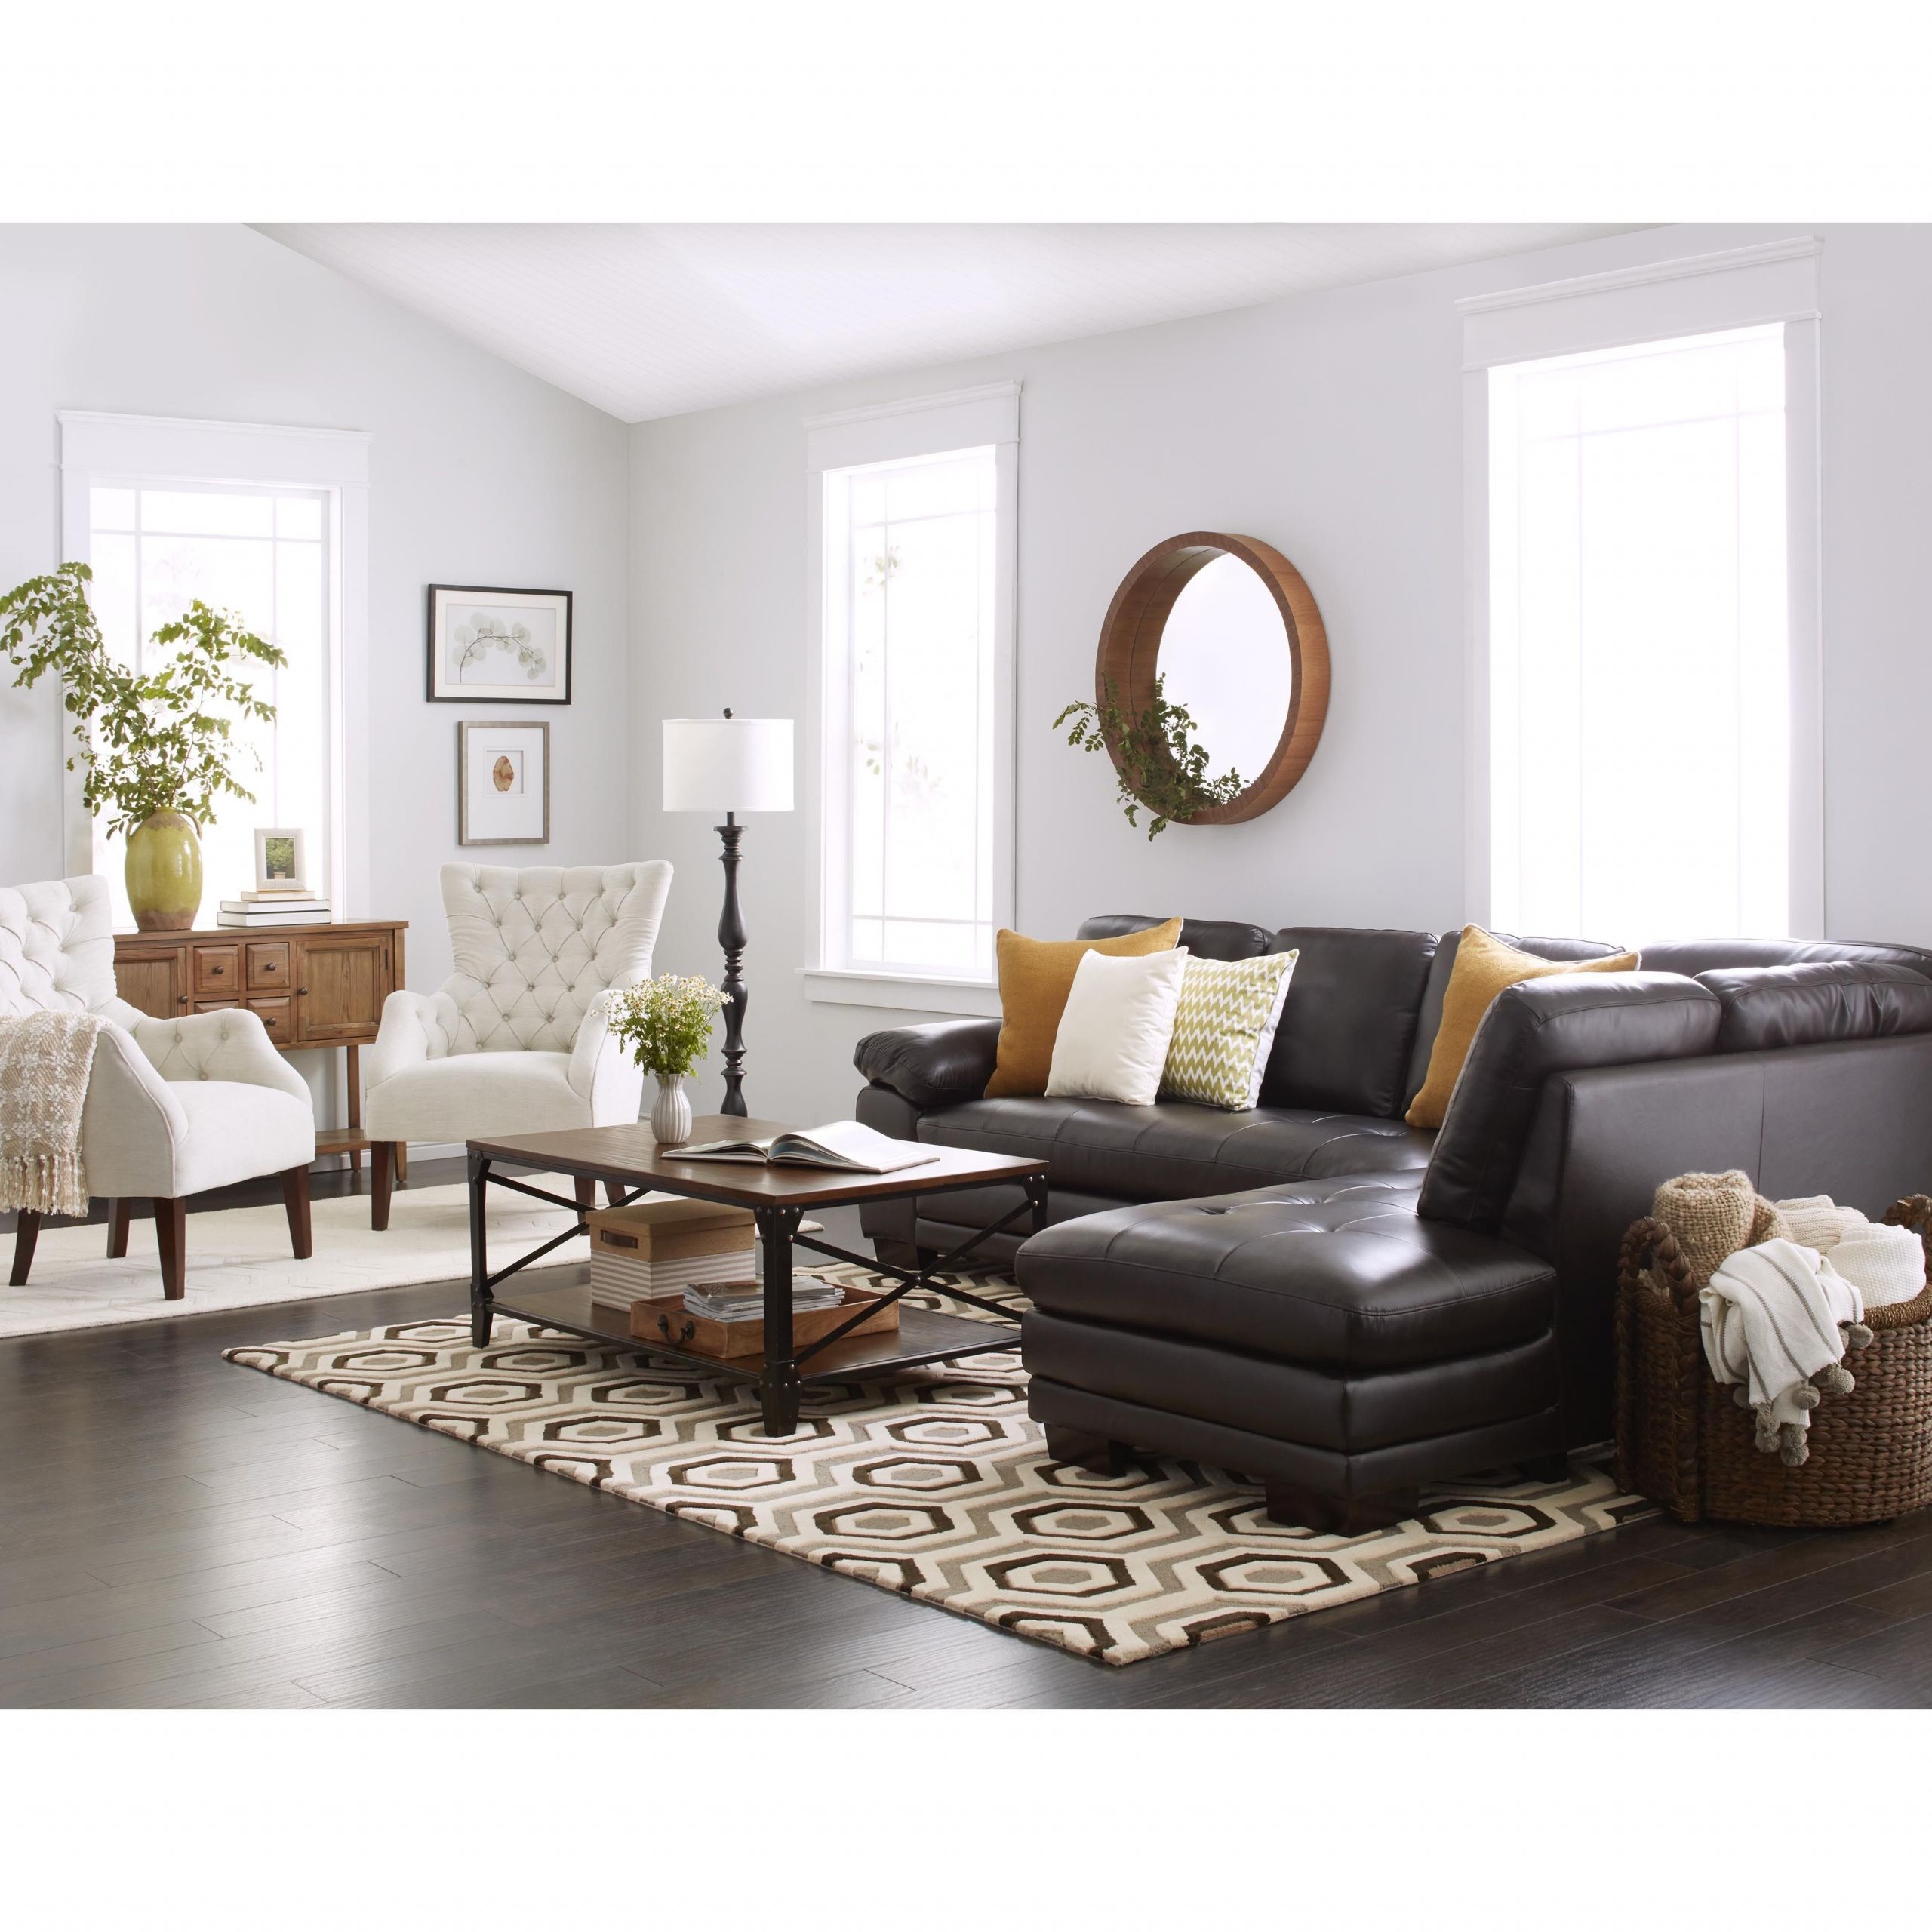 Brown Sofa Living Room Ideas
 line Shopping Bedding Furniture Electronics Jewelry